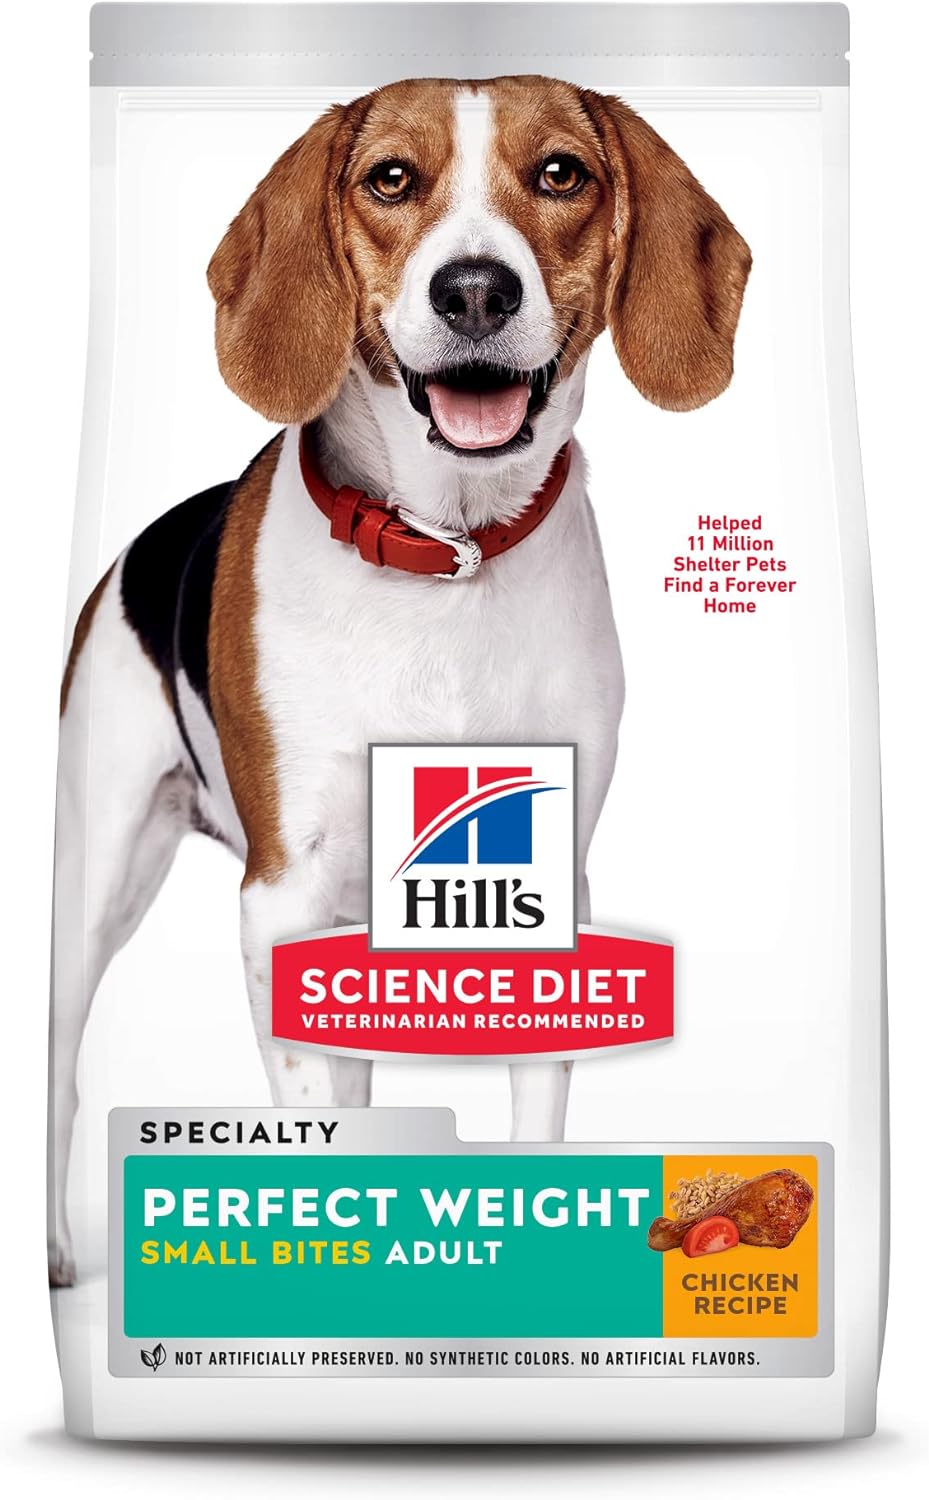 SCIENCE DIET K9 PERFECT WEIGHT SMALL BITES